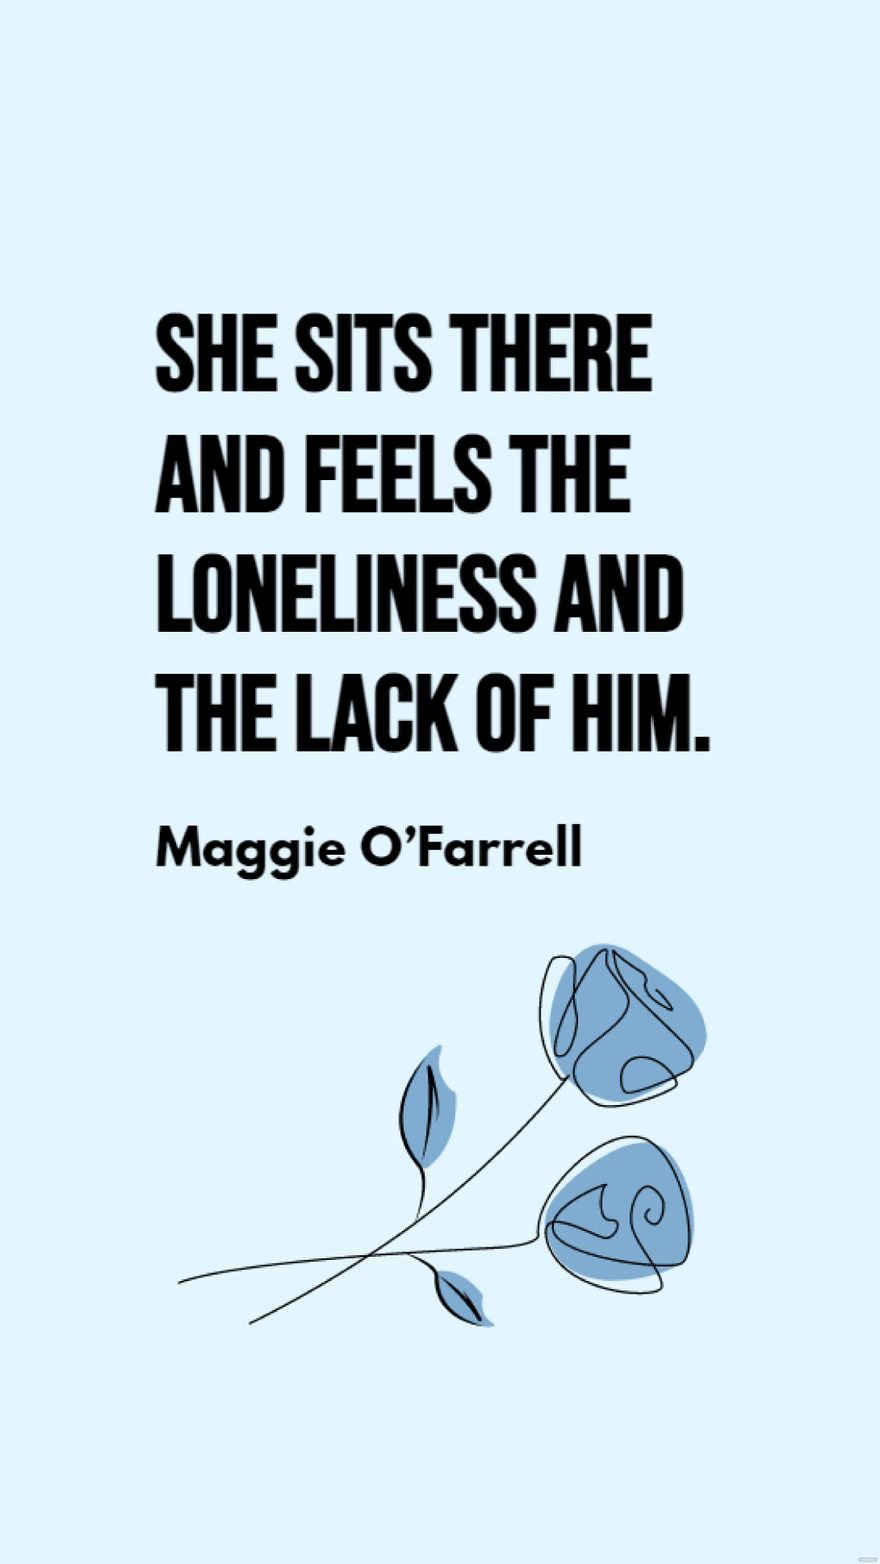 Maggie O’Farrell - She sits there and feels the loneliness and the lack of him.